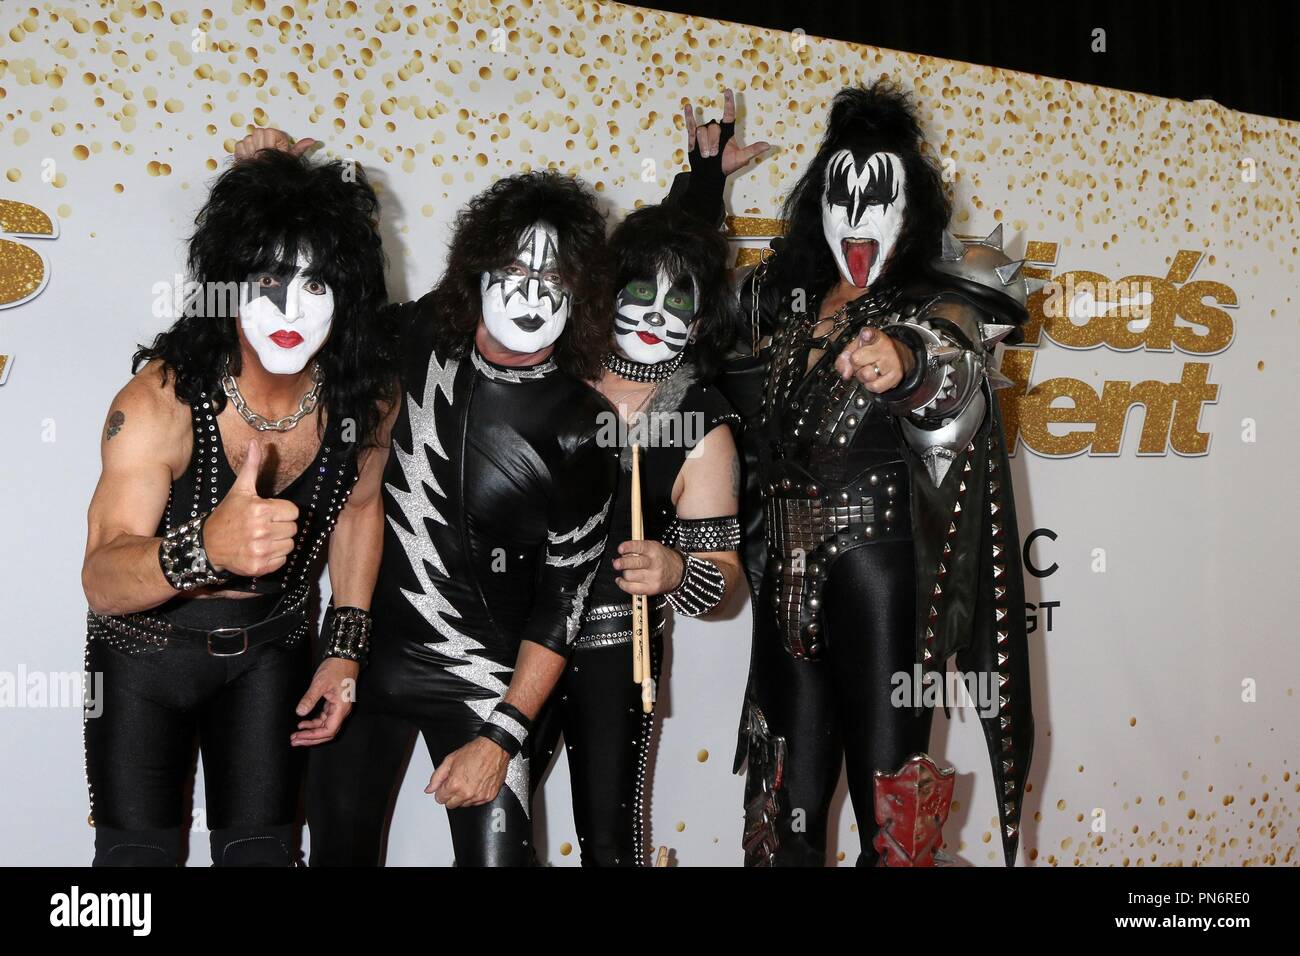 Los Angeles, CA, USA. 19th Sep, 2018. Paul Stanley, Tommy Thayer, Eric Singer, Gene Simmons, KISS at arrivals for AMERICA'S GOT TALENT (AGT) Season 13 Finale Live Show Red Carpet, Dolby Theatre, Los Angeles, CA September 19, 2018. Credit: Priscilla Grant/Everett Collection/Alamy Live News Stock Photo